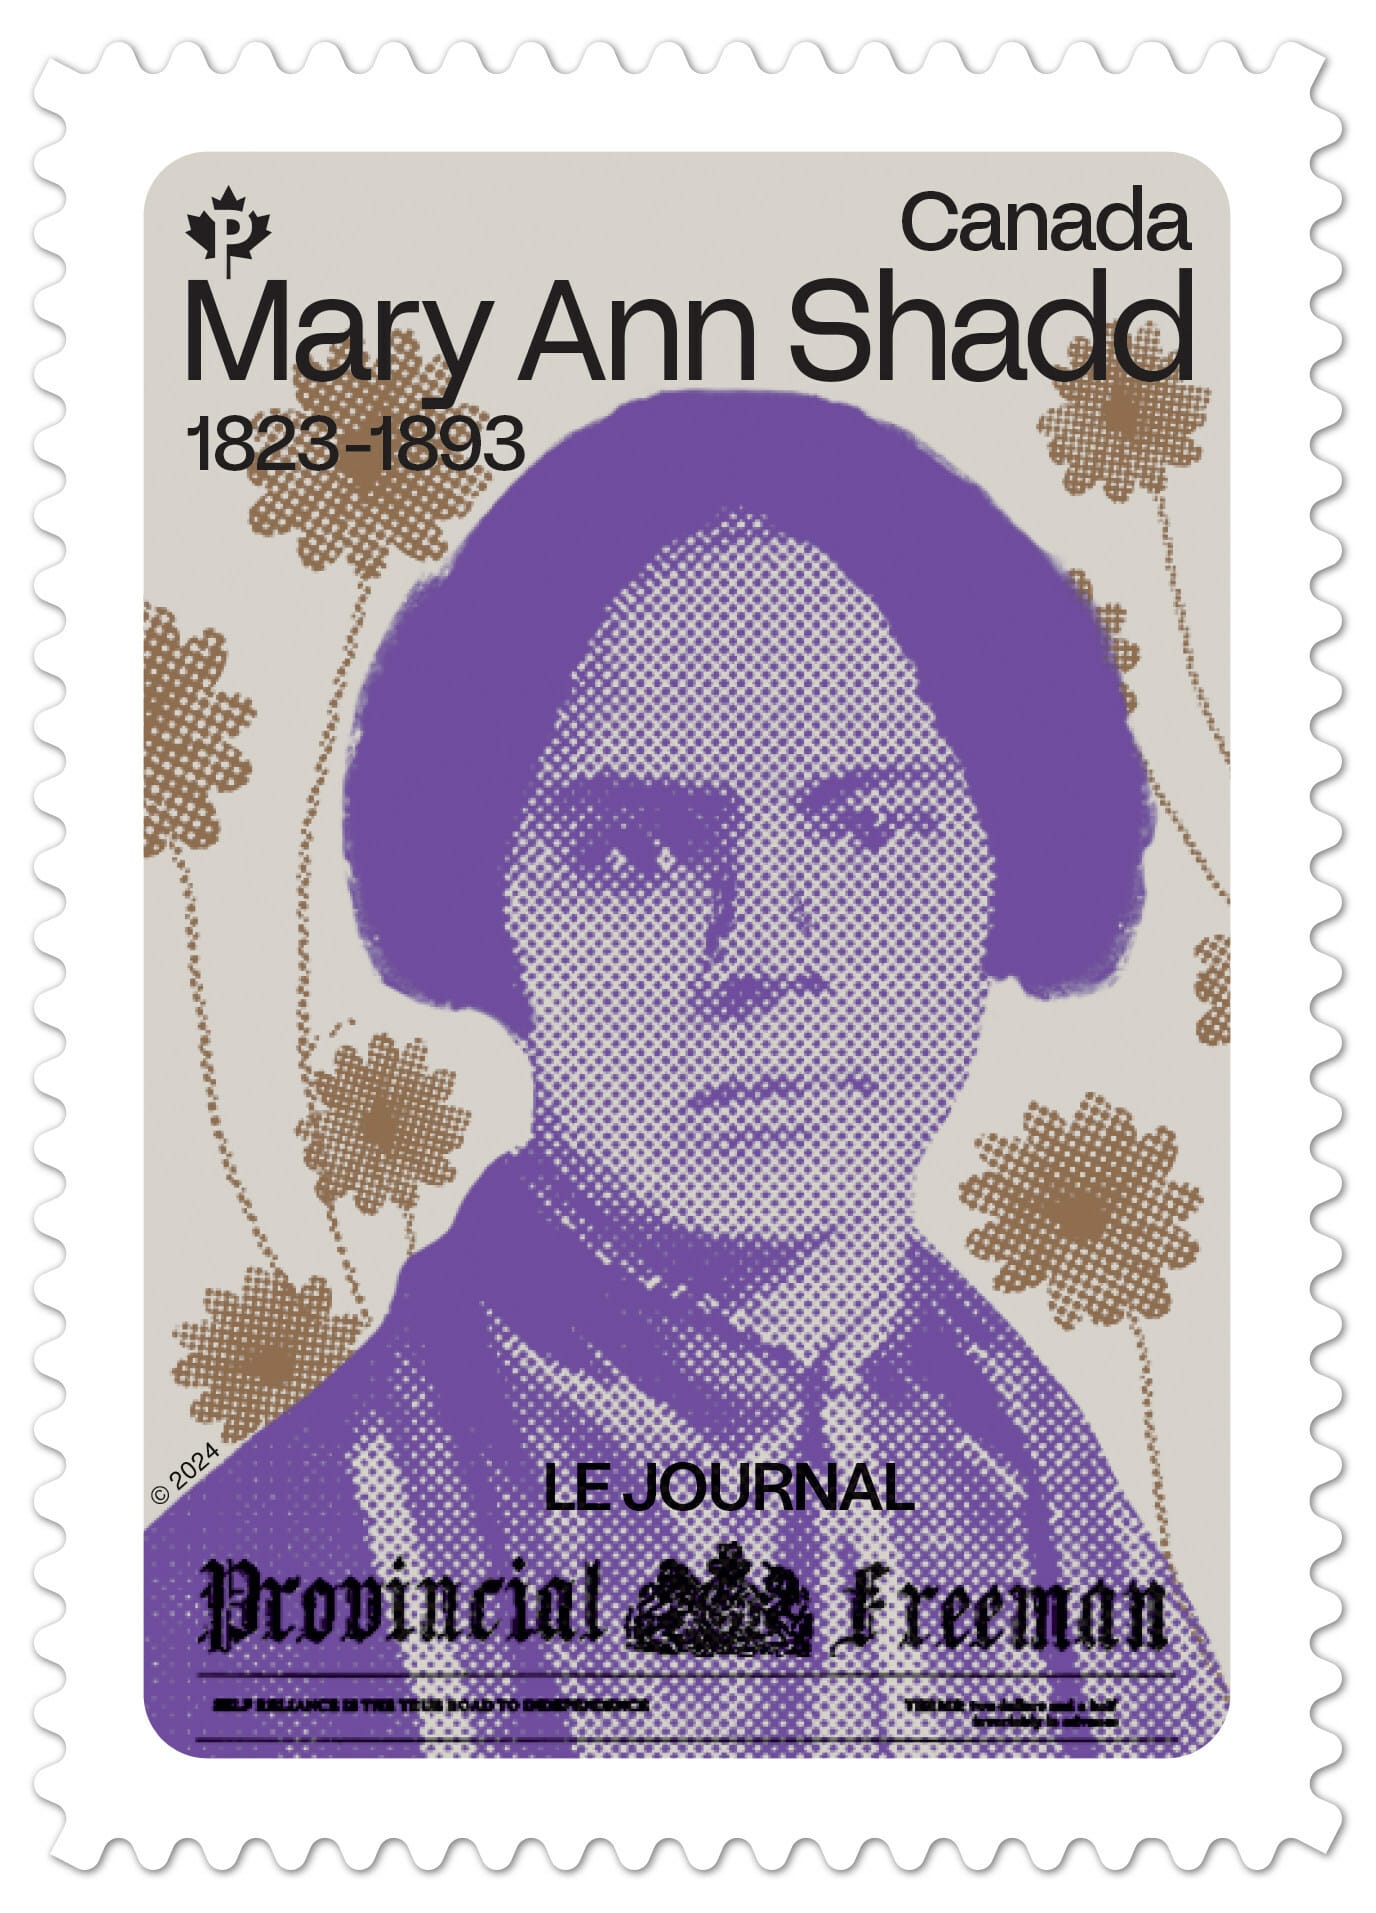 Canada Post unveiling special stamp honouring Black abolitionist Mary Ann Shadd